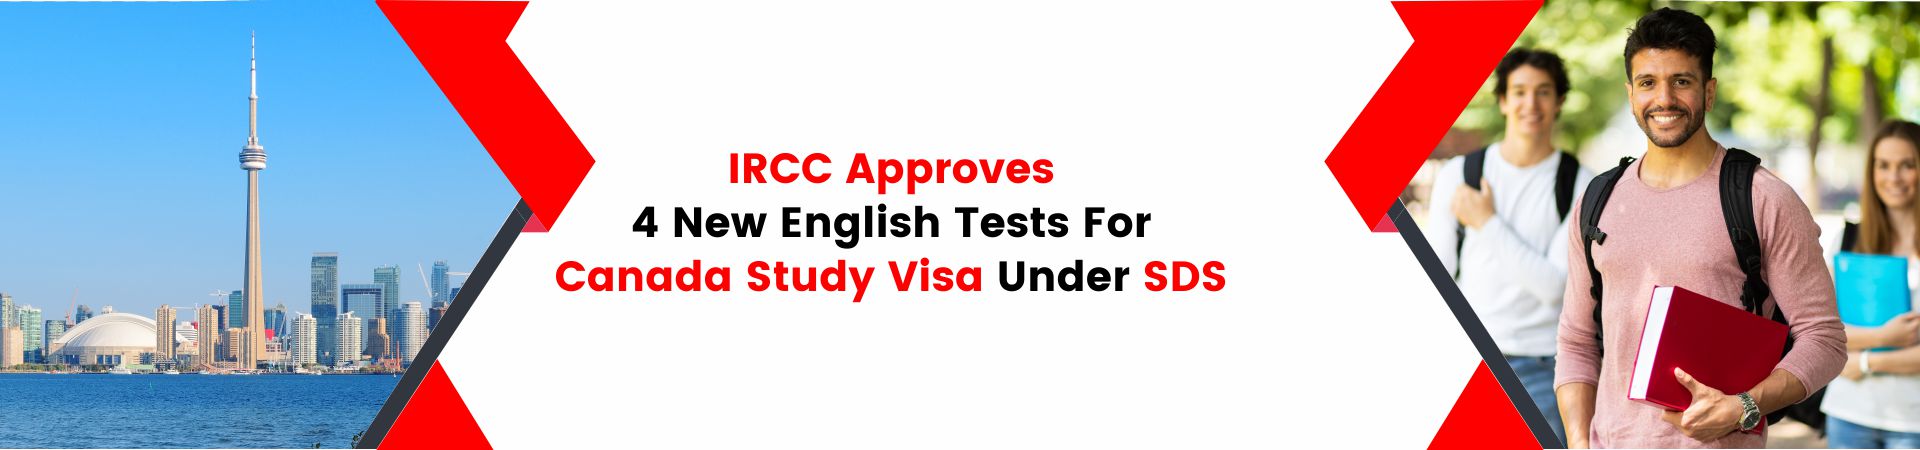 IRCC approves 4 New English Tests For Canada Study Visa Under SDS